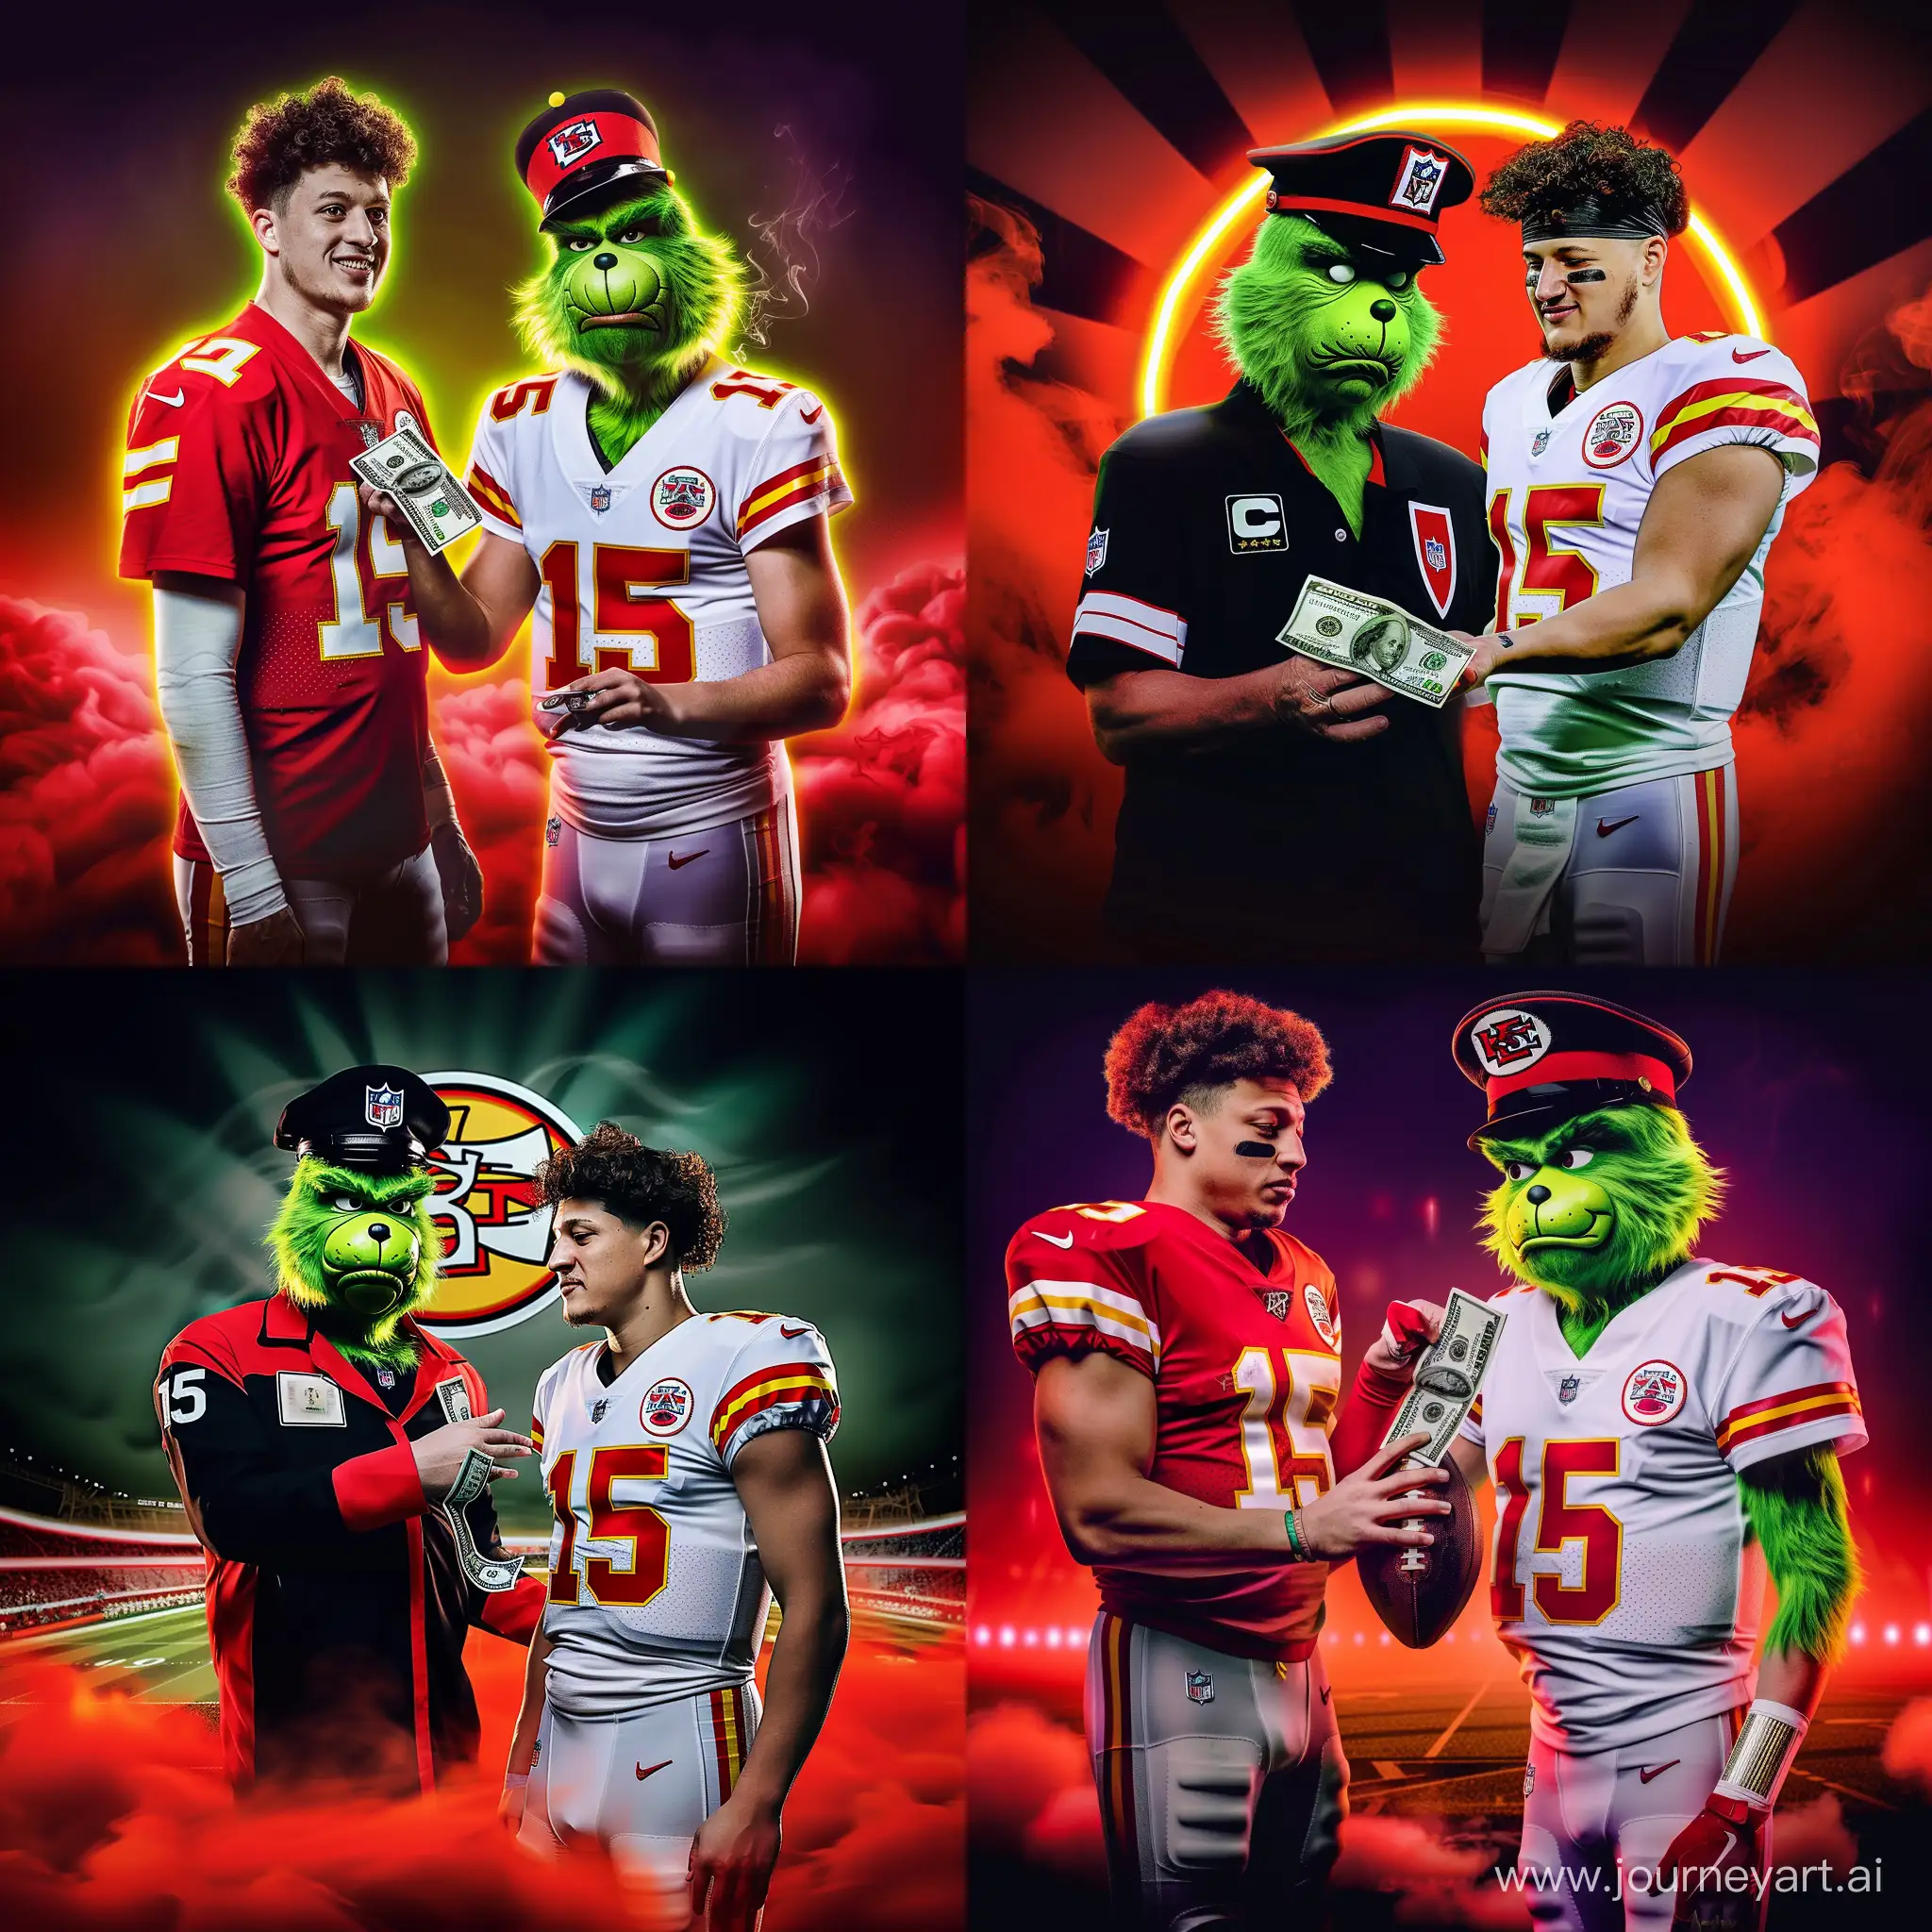 Create an image of (The Grinch in official NFL referee uniform and cap) giving money to (Kansas City Chiefs quarterback number 15 Patrick Mahomes) on the "Super Bowl", field dark neon smokey background